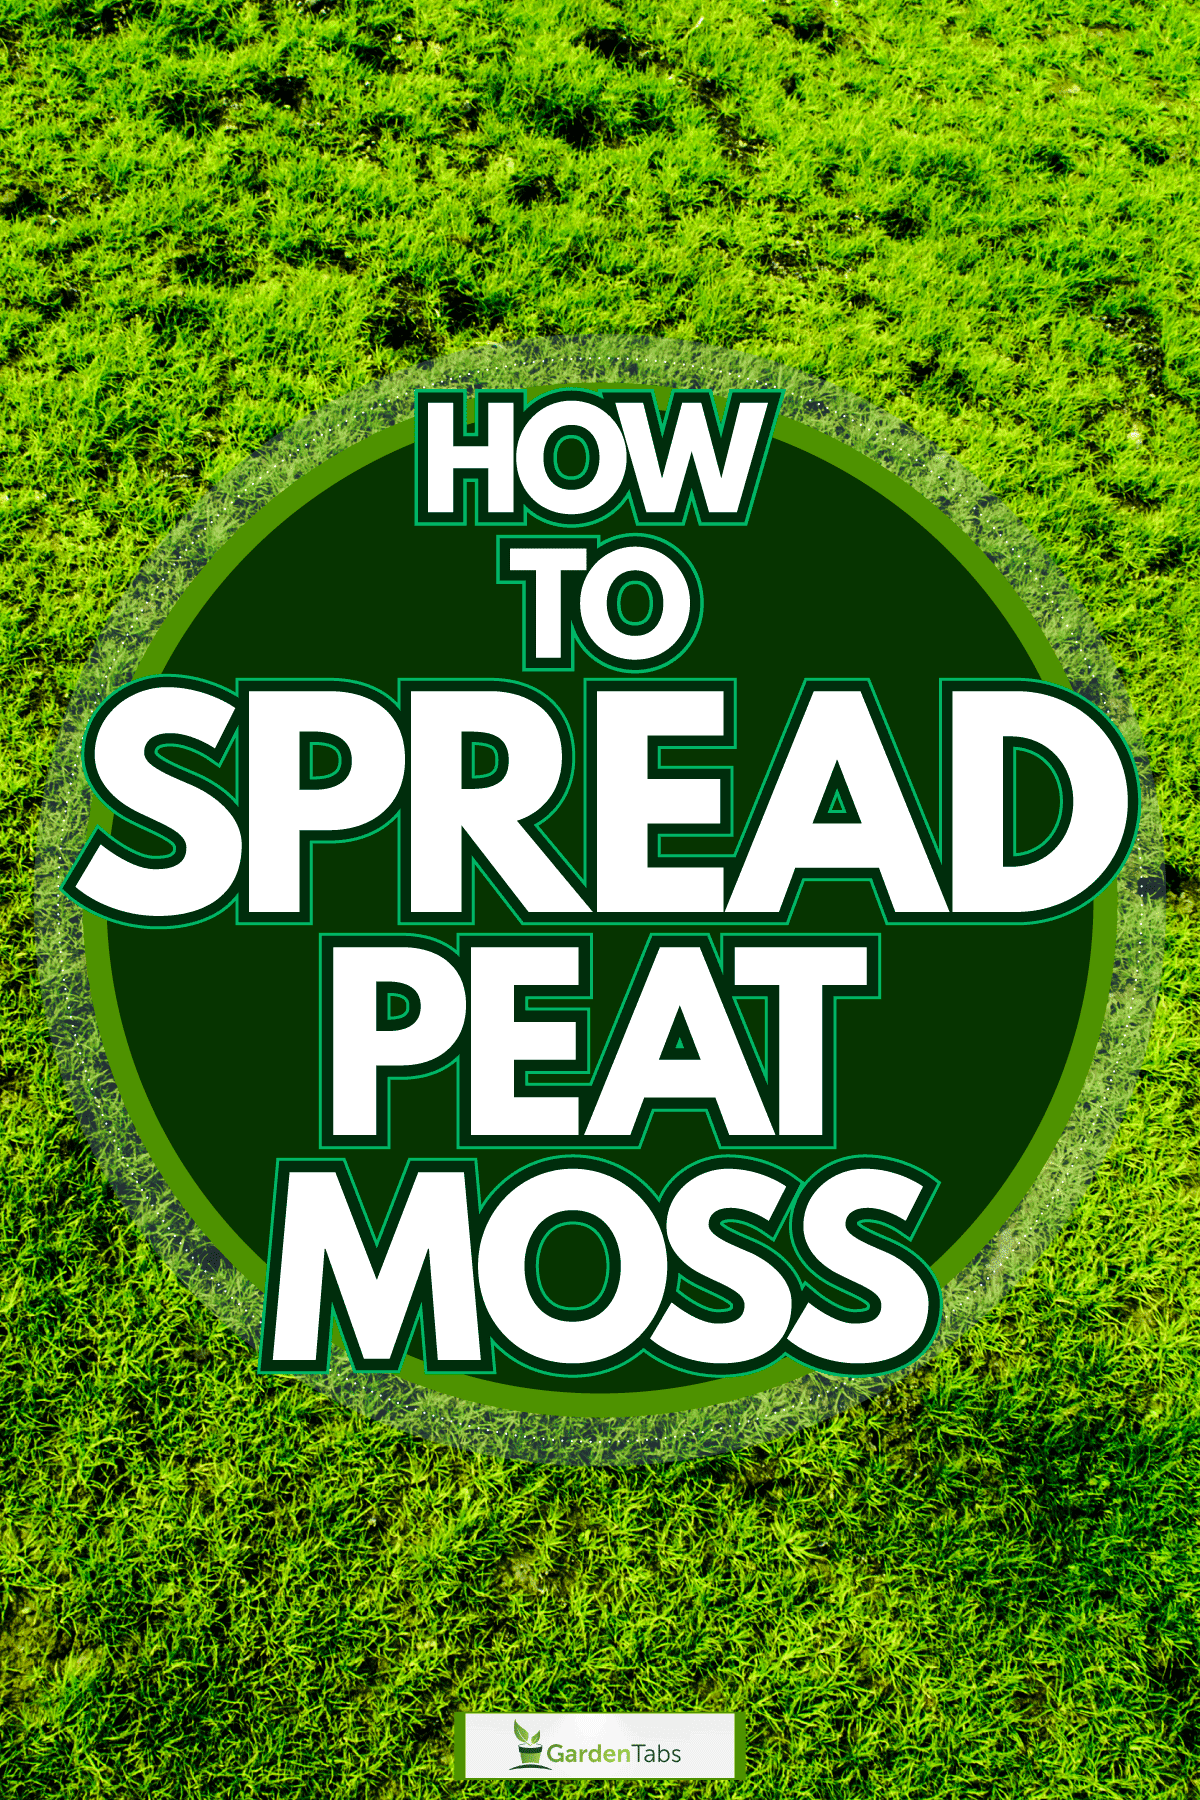 Spreading moss at the garden, How To Spread Peat Moss